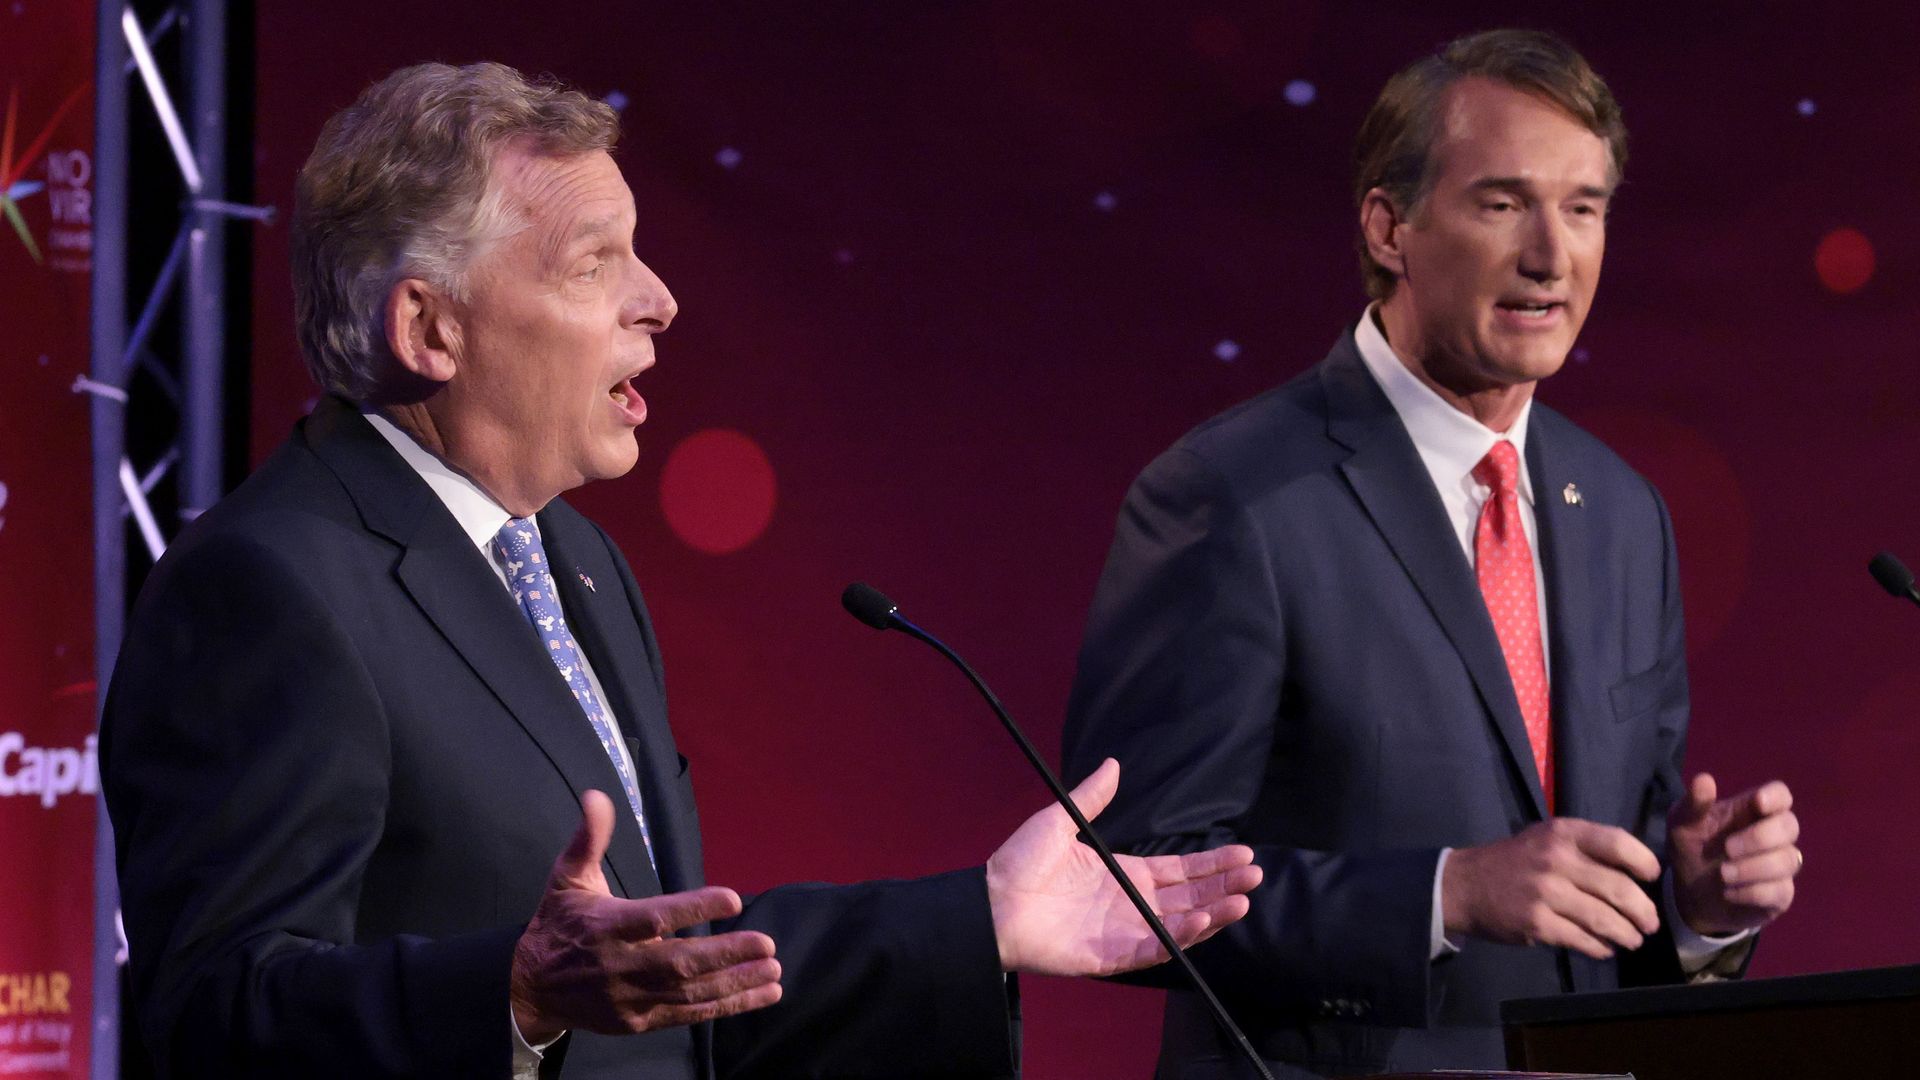 Terry McAuliffe and Glenn Youngkin are seen during a debate in September.